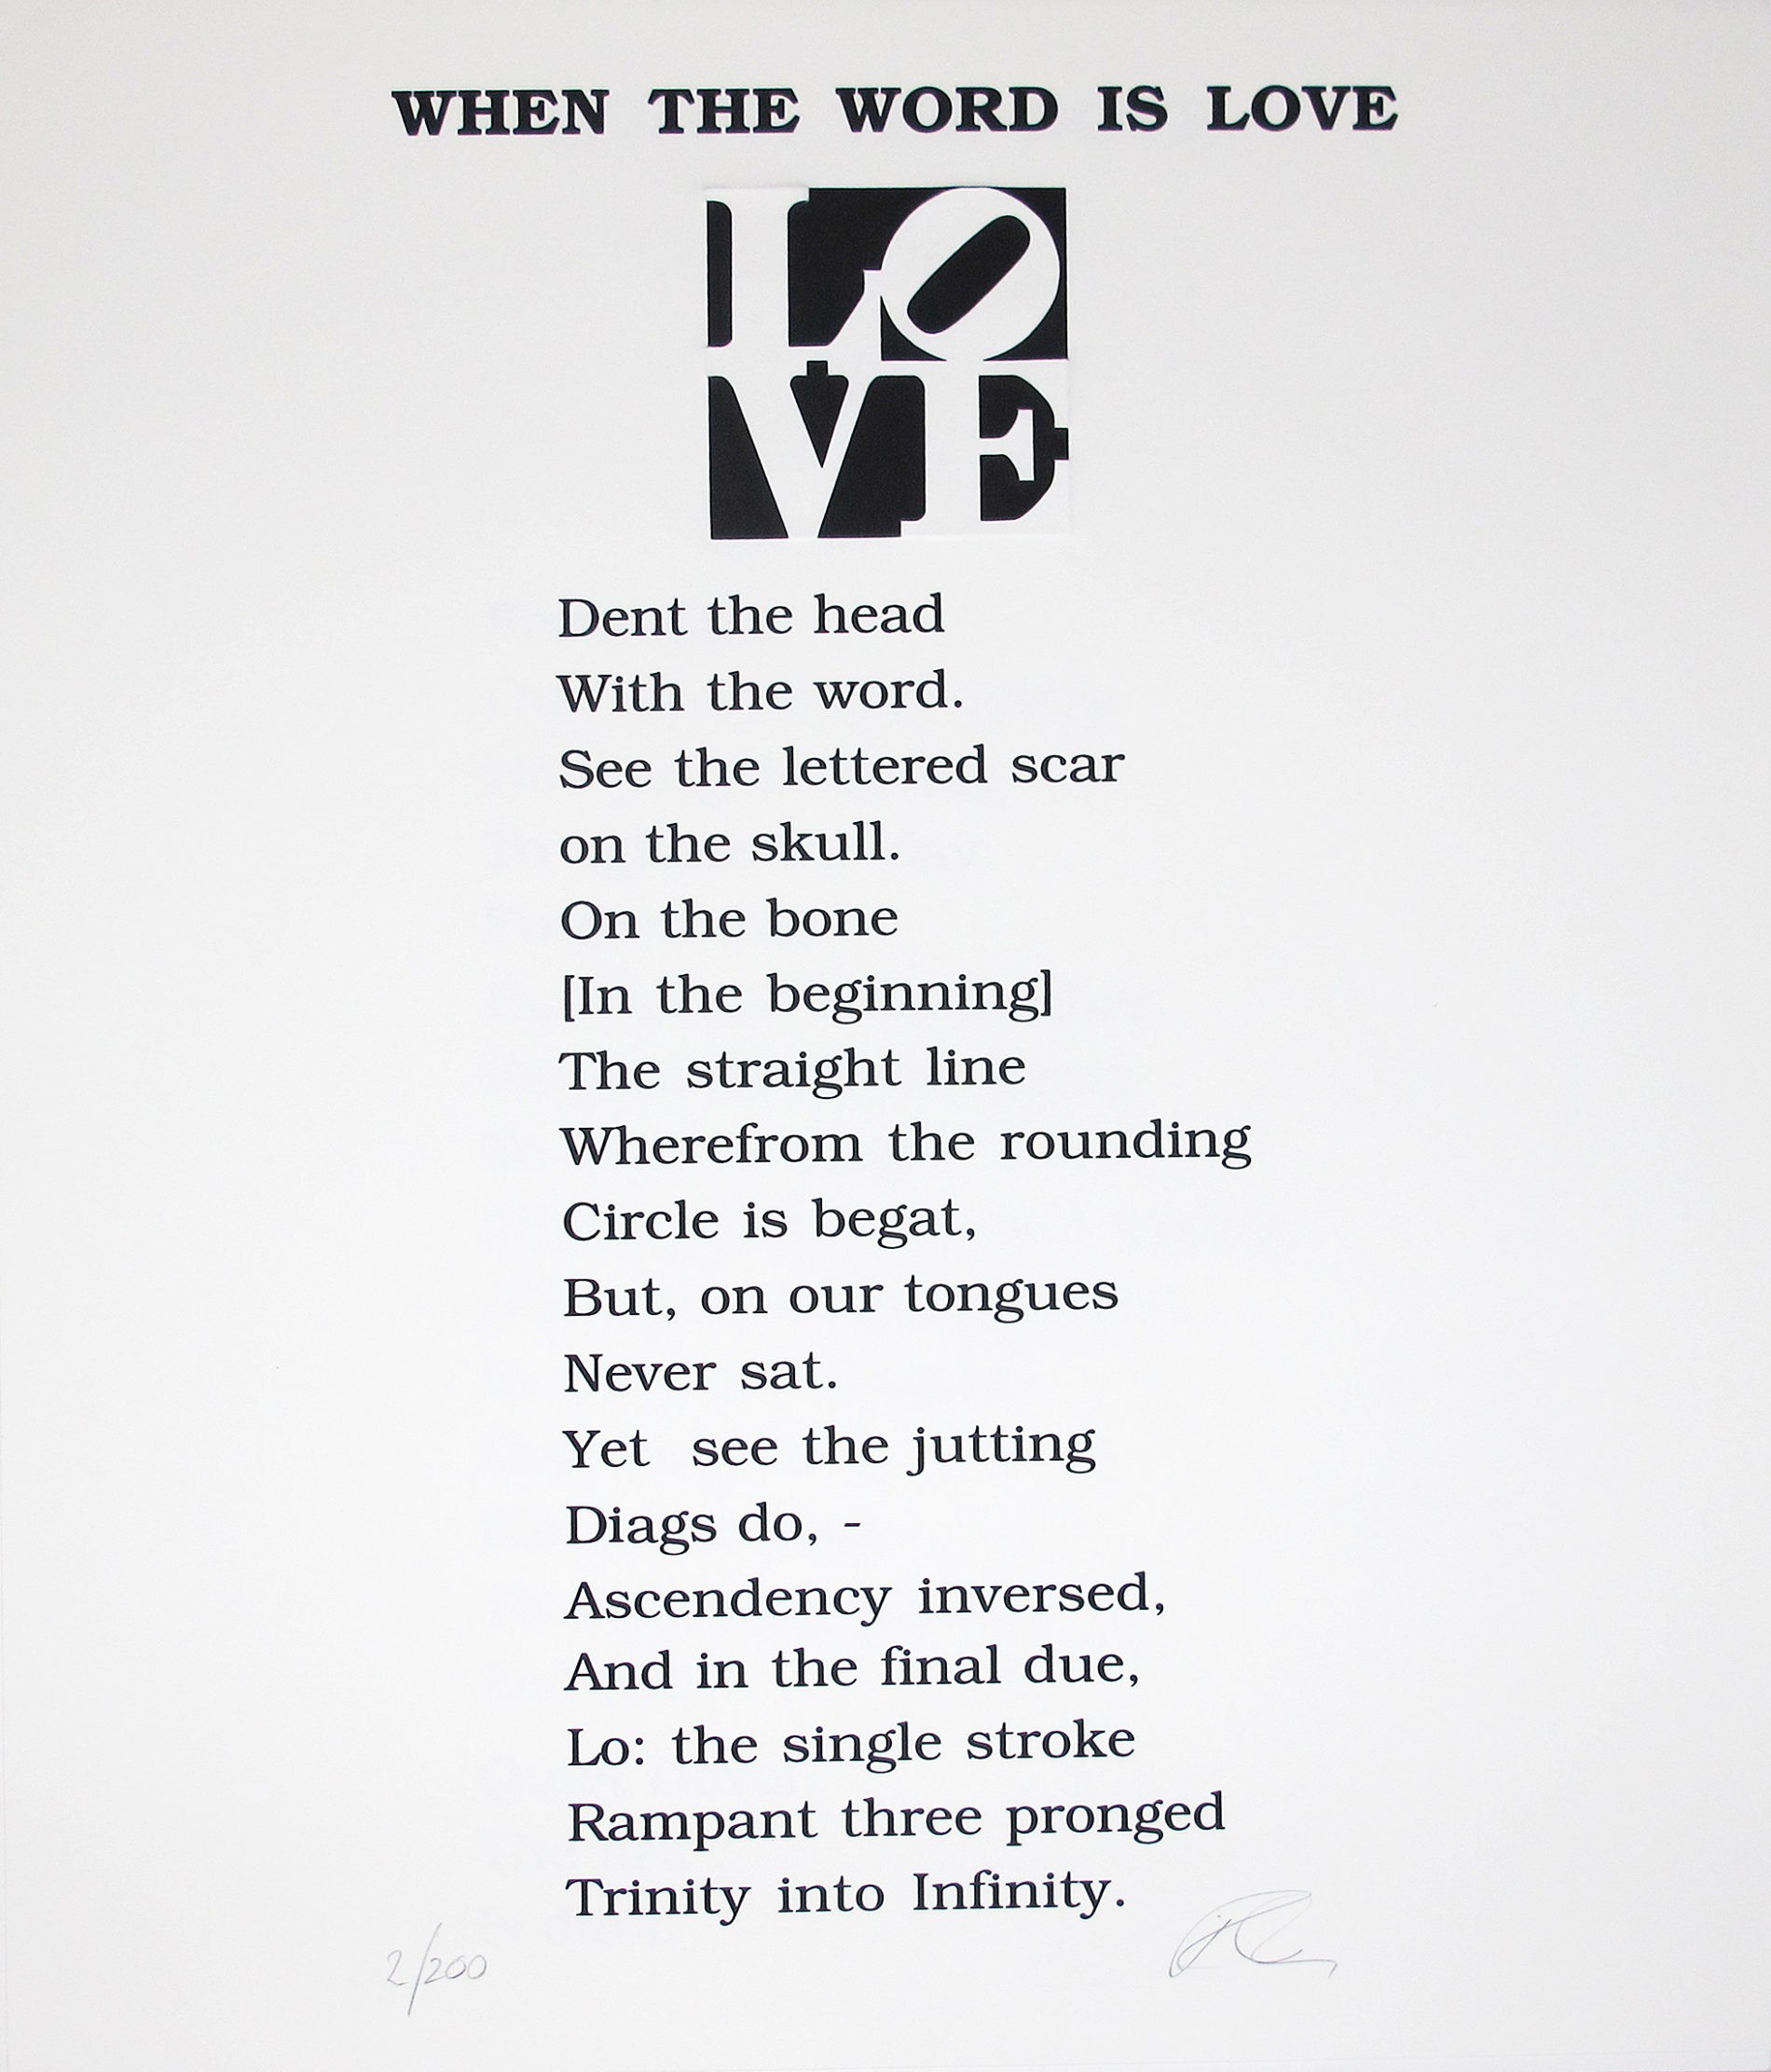 Robert Indiana | The Book of Love Poem | When the Word Is Love | 1996 | Image of Artists' work.